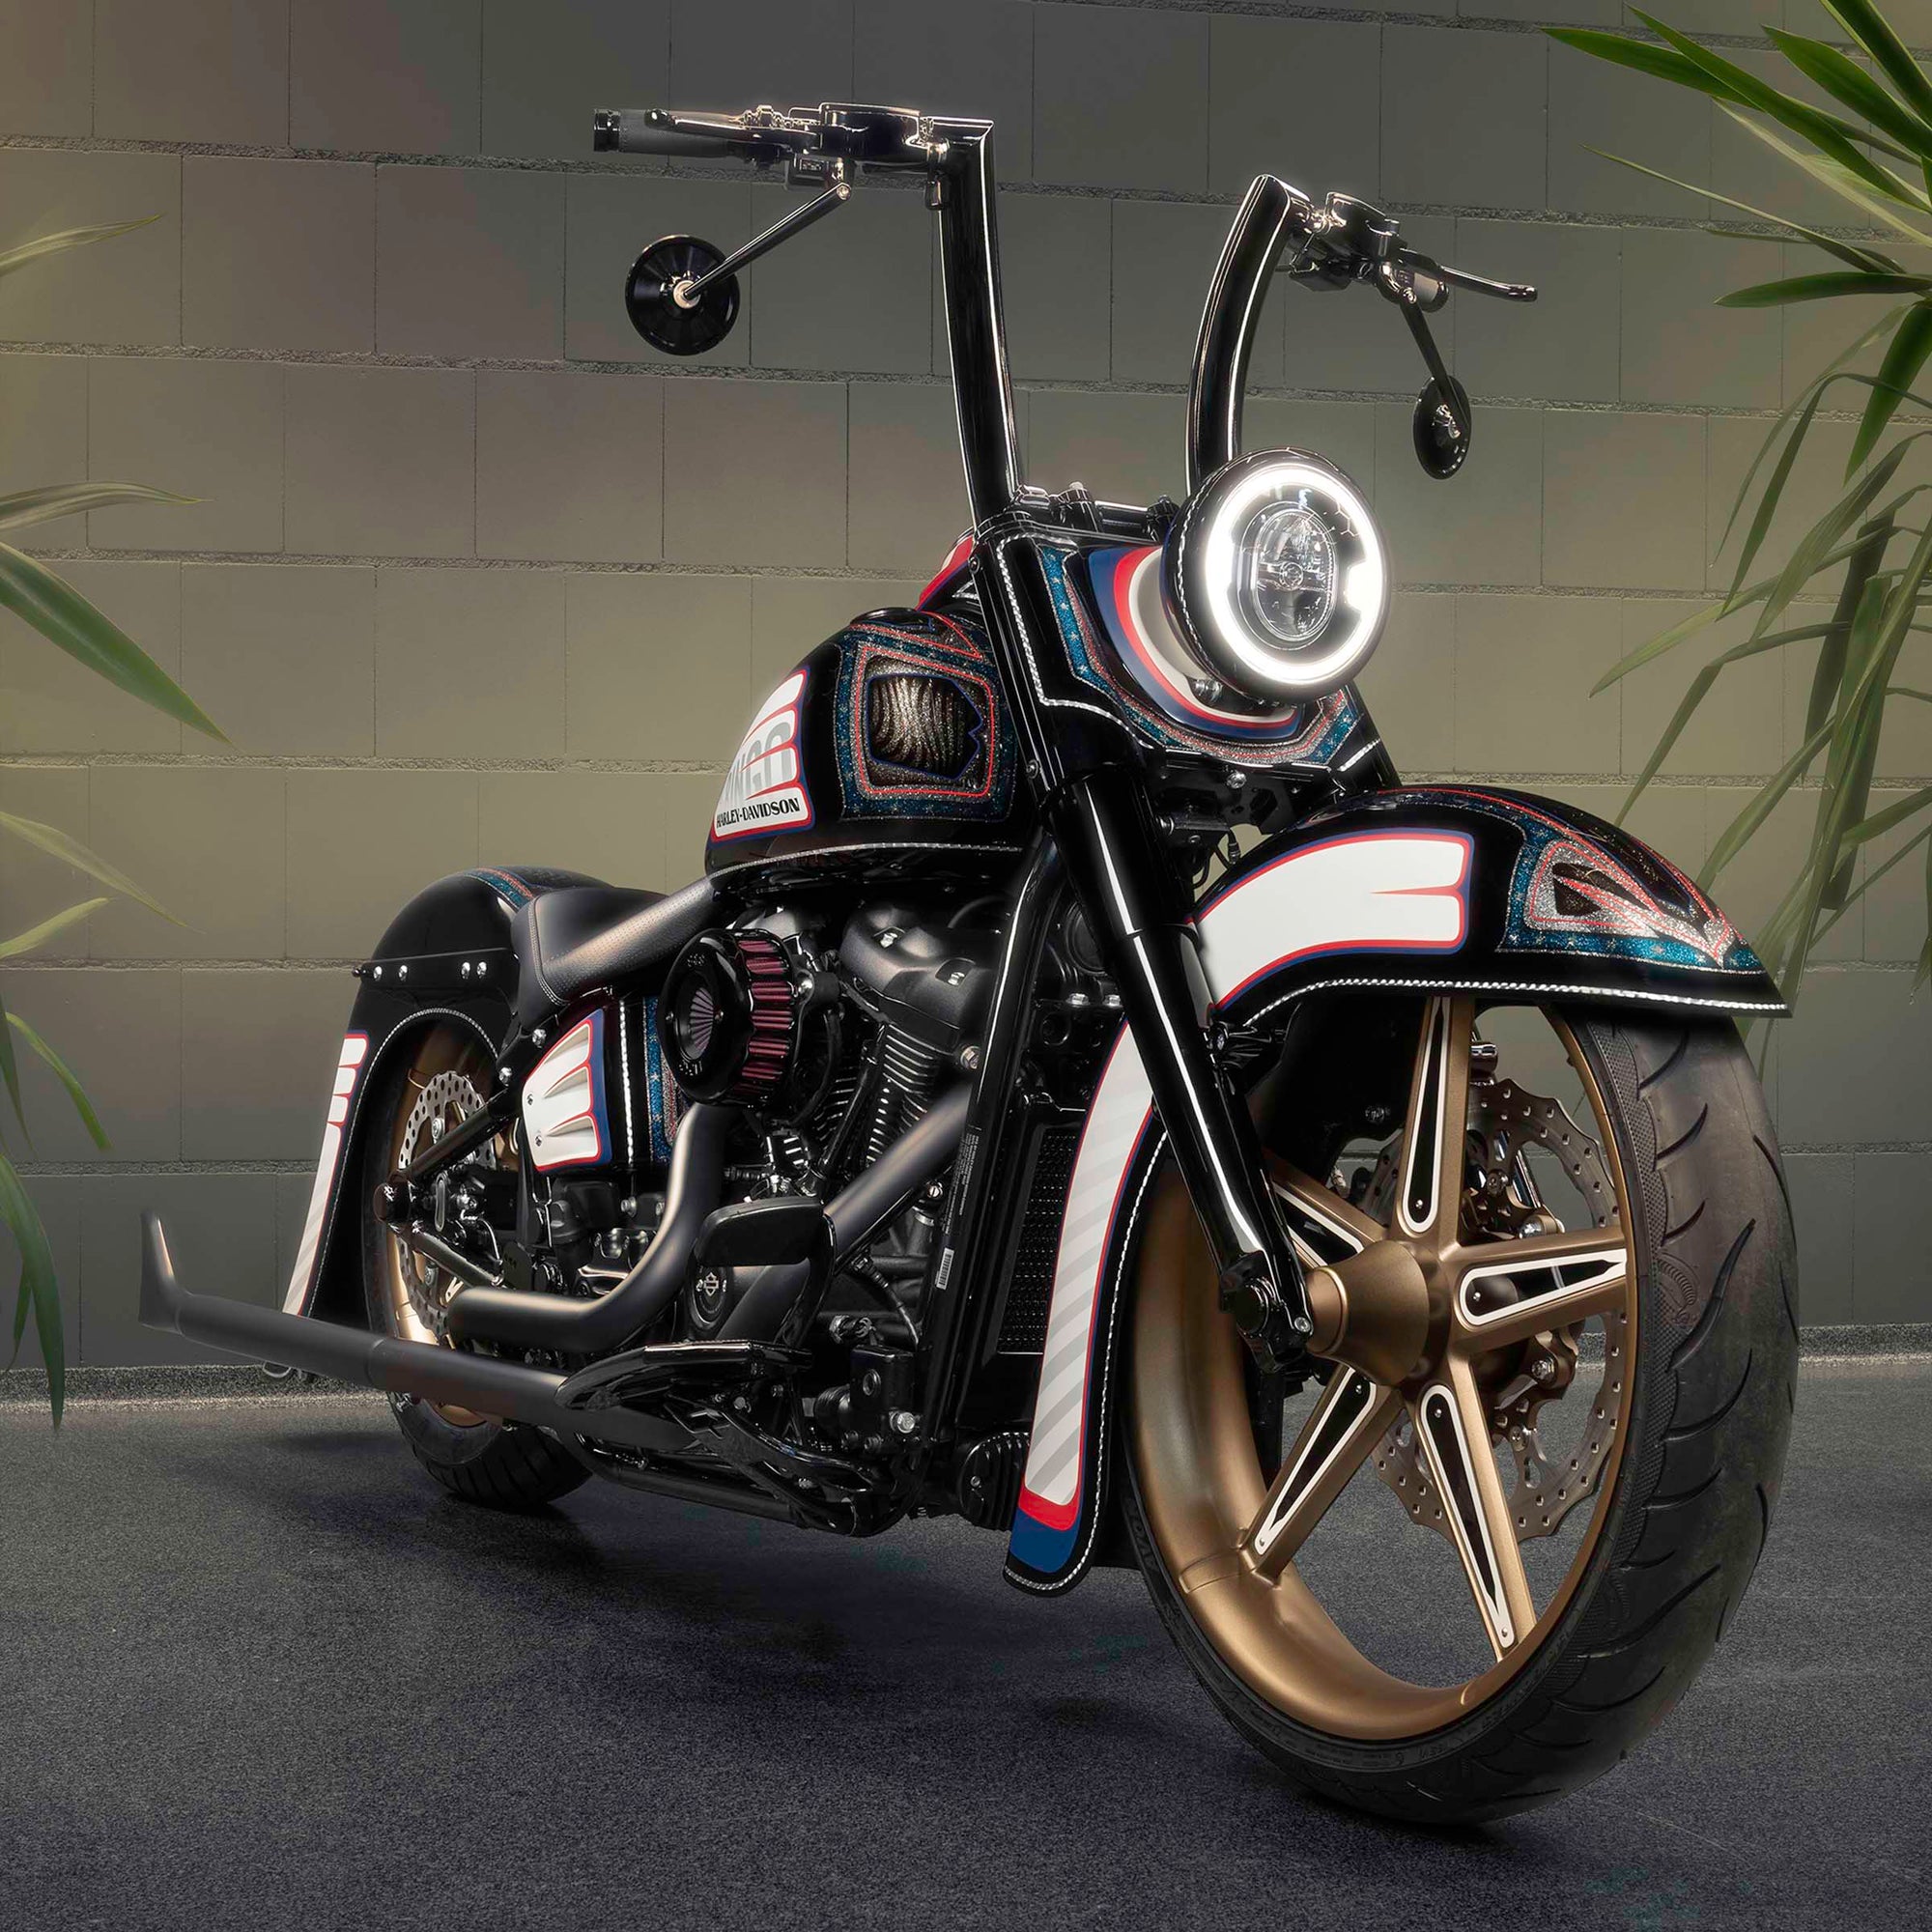 Modified Harley Davidson motorcycle with Killer Custom parts from the front with some house plants in the background